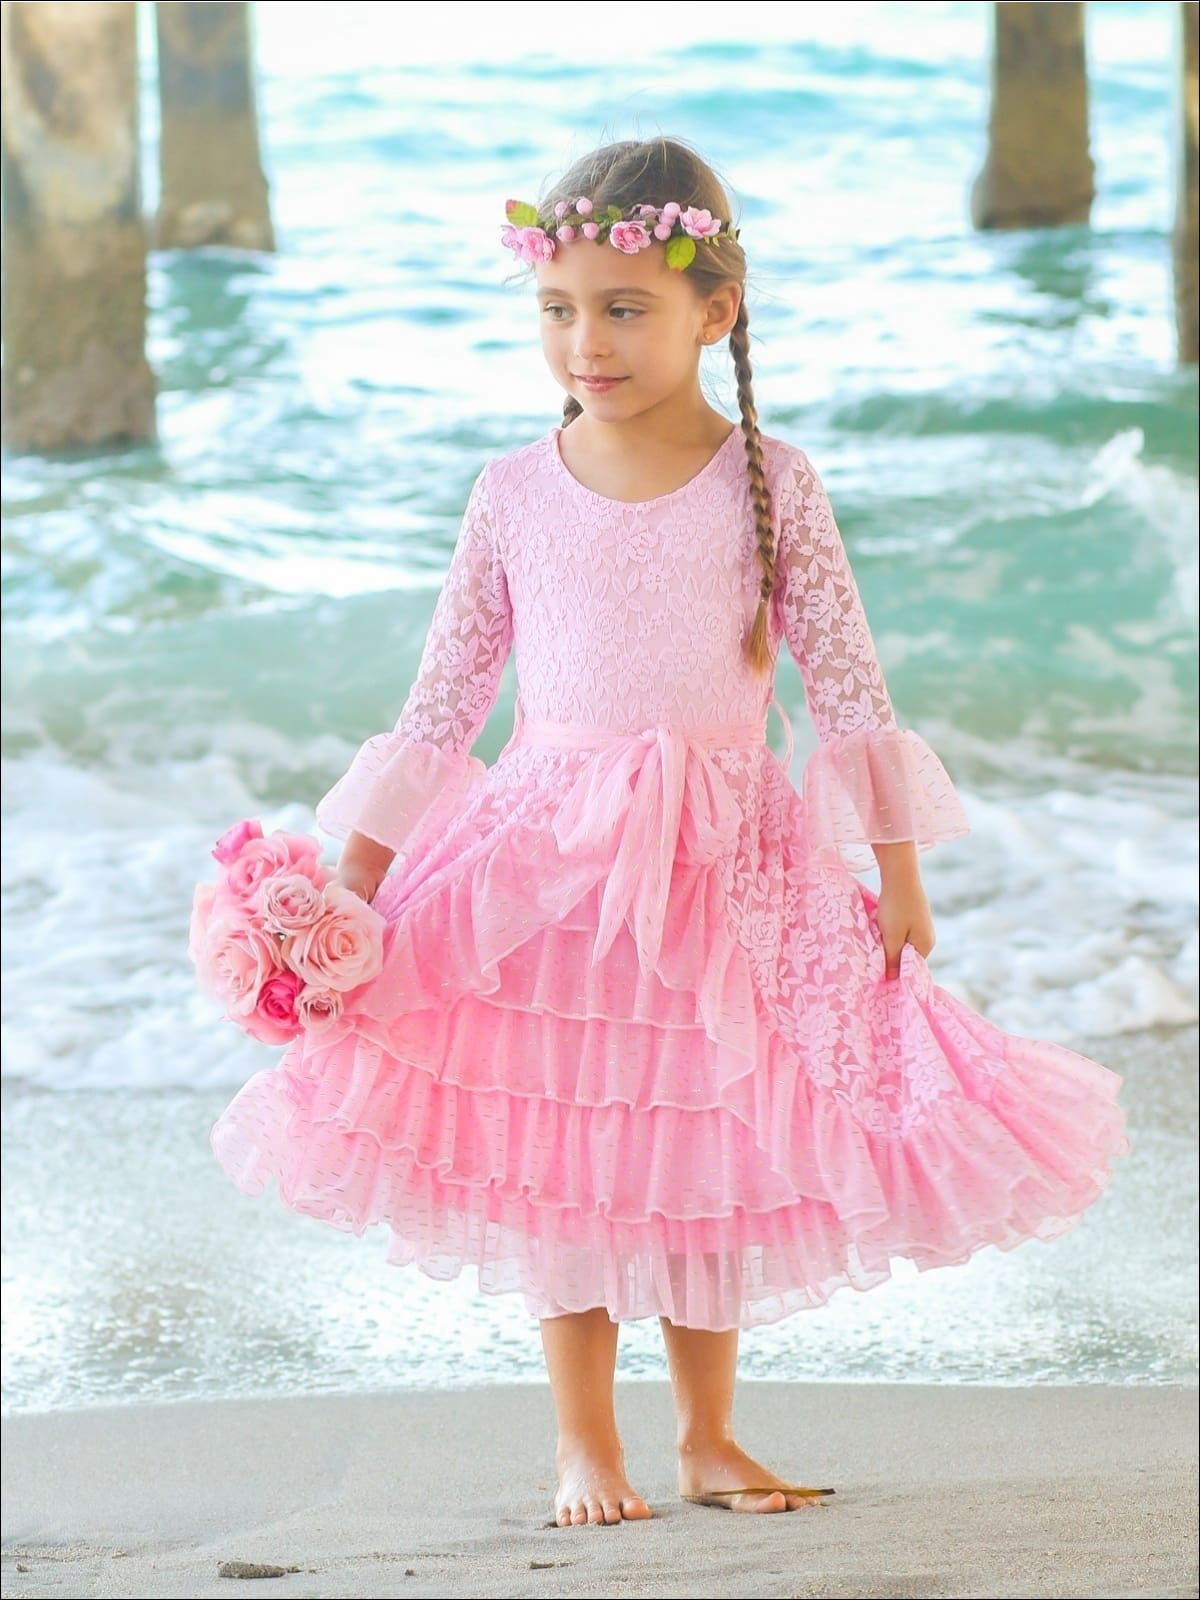 Girls Lace Bell Sleeve Tiered Ruffled Dress with Sash - Pink / 2T/3T - Girls Spring Dressy Dress